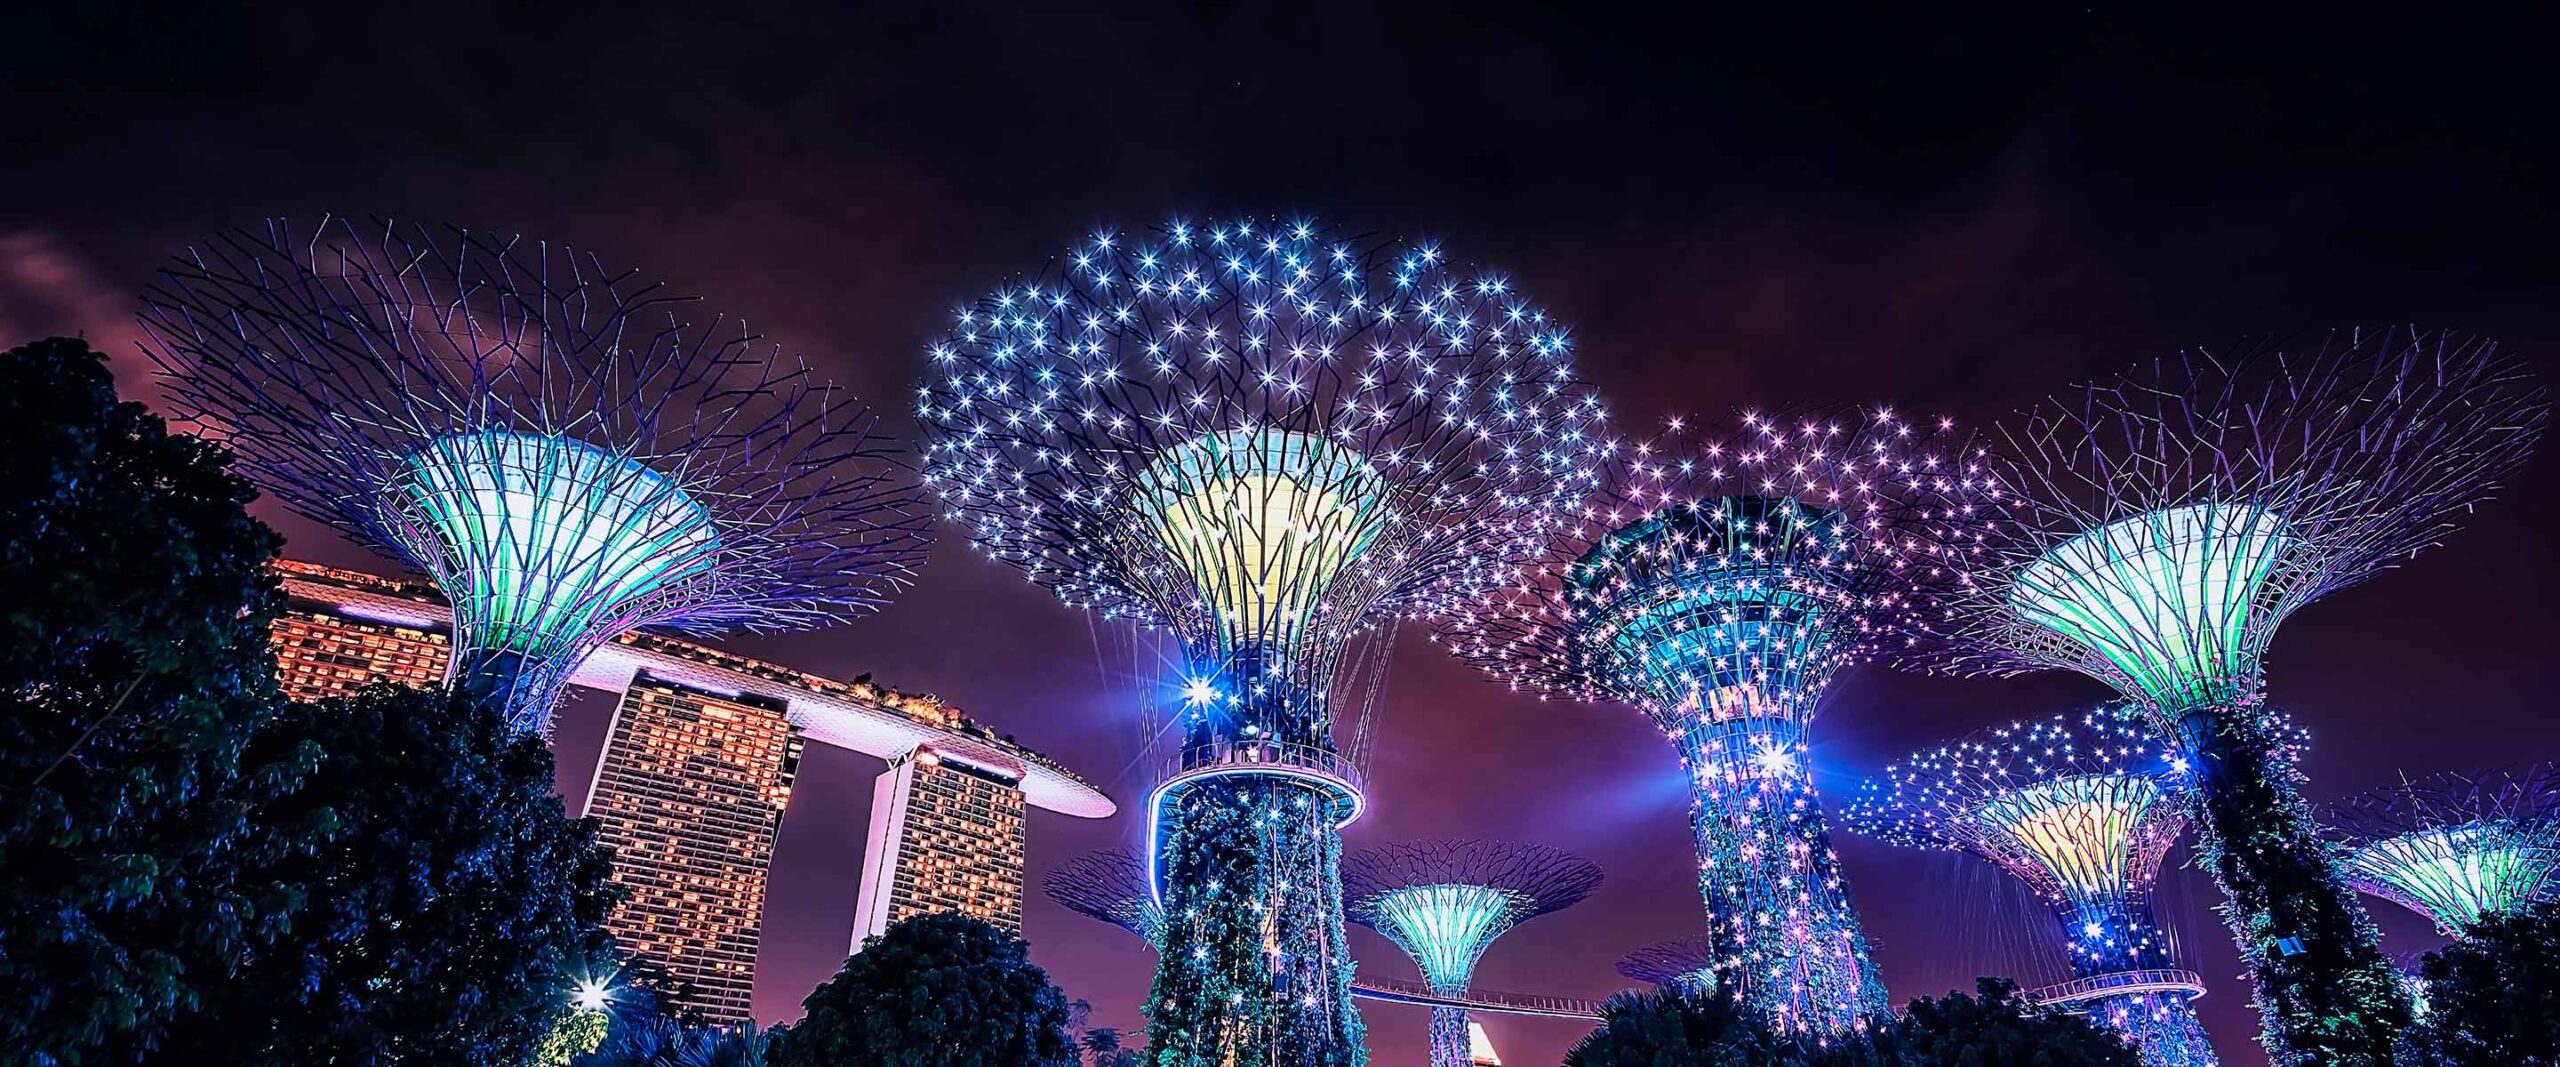 A photo of the Gardens by the Bay in Singapore.